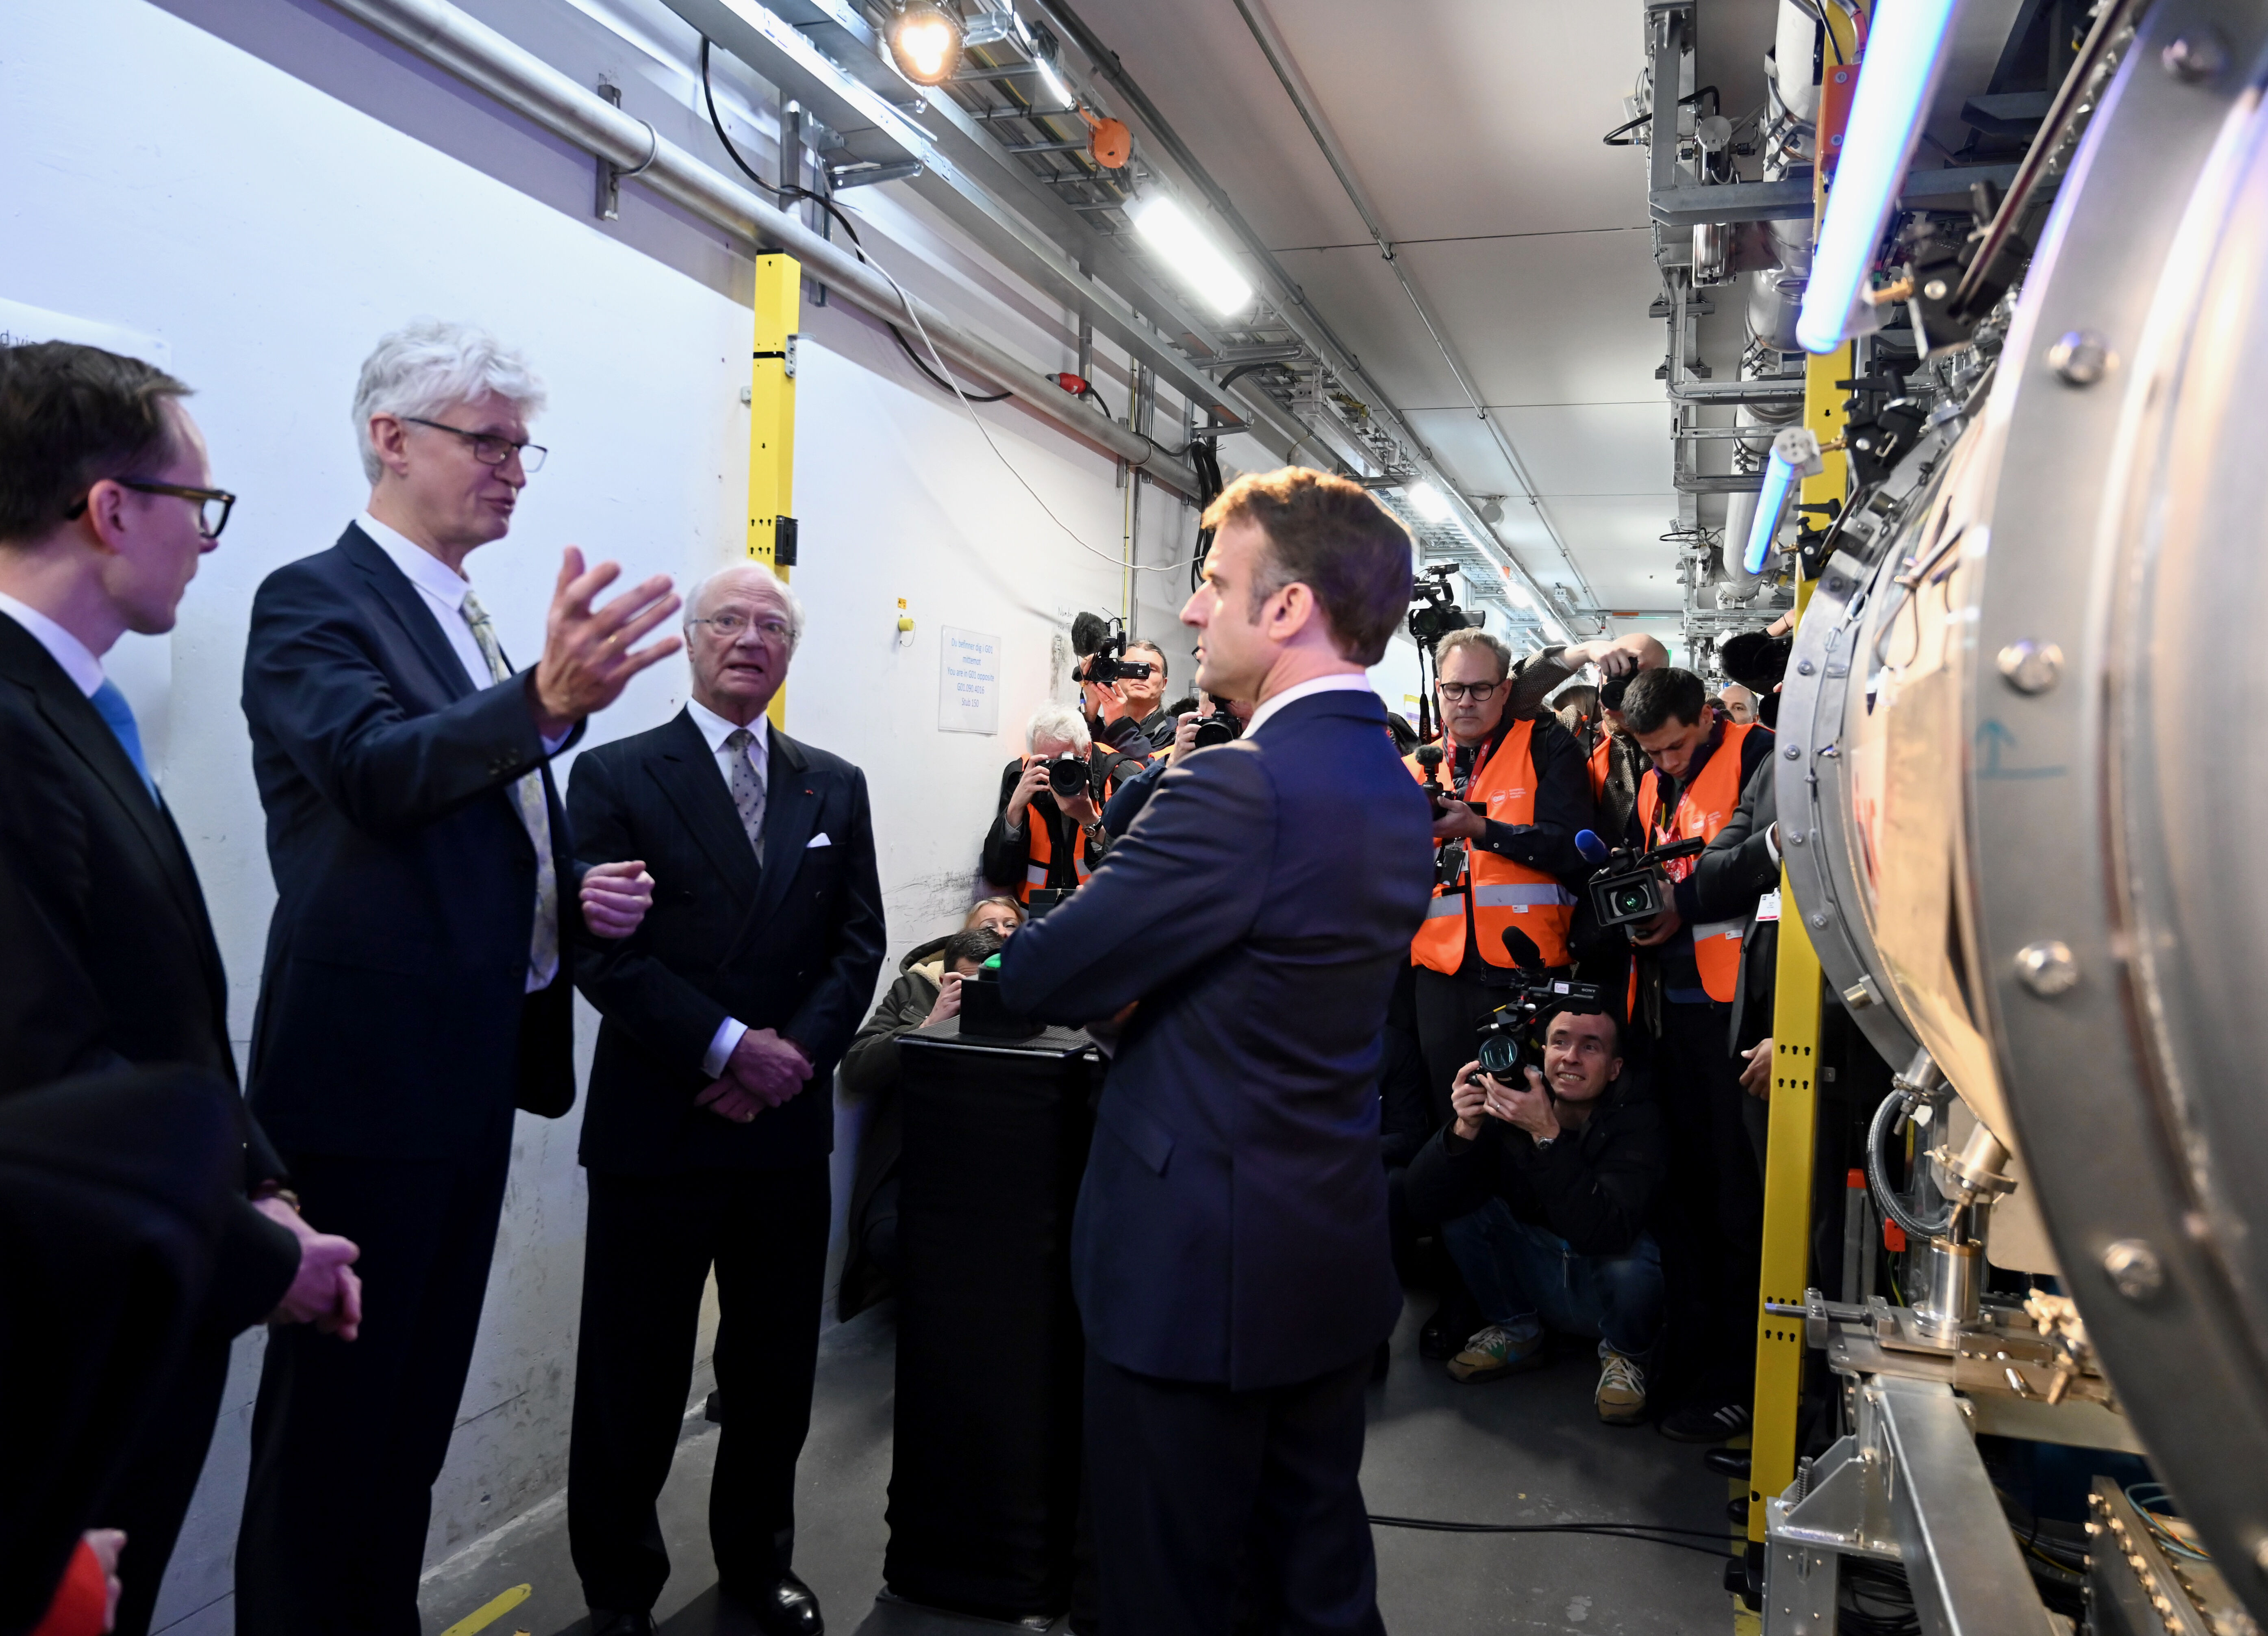 DG Helmut Schober in a tunnel with the accelerator on the right,  explains to HRH The King and President Macron about how a particle accelerator works